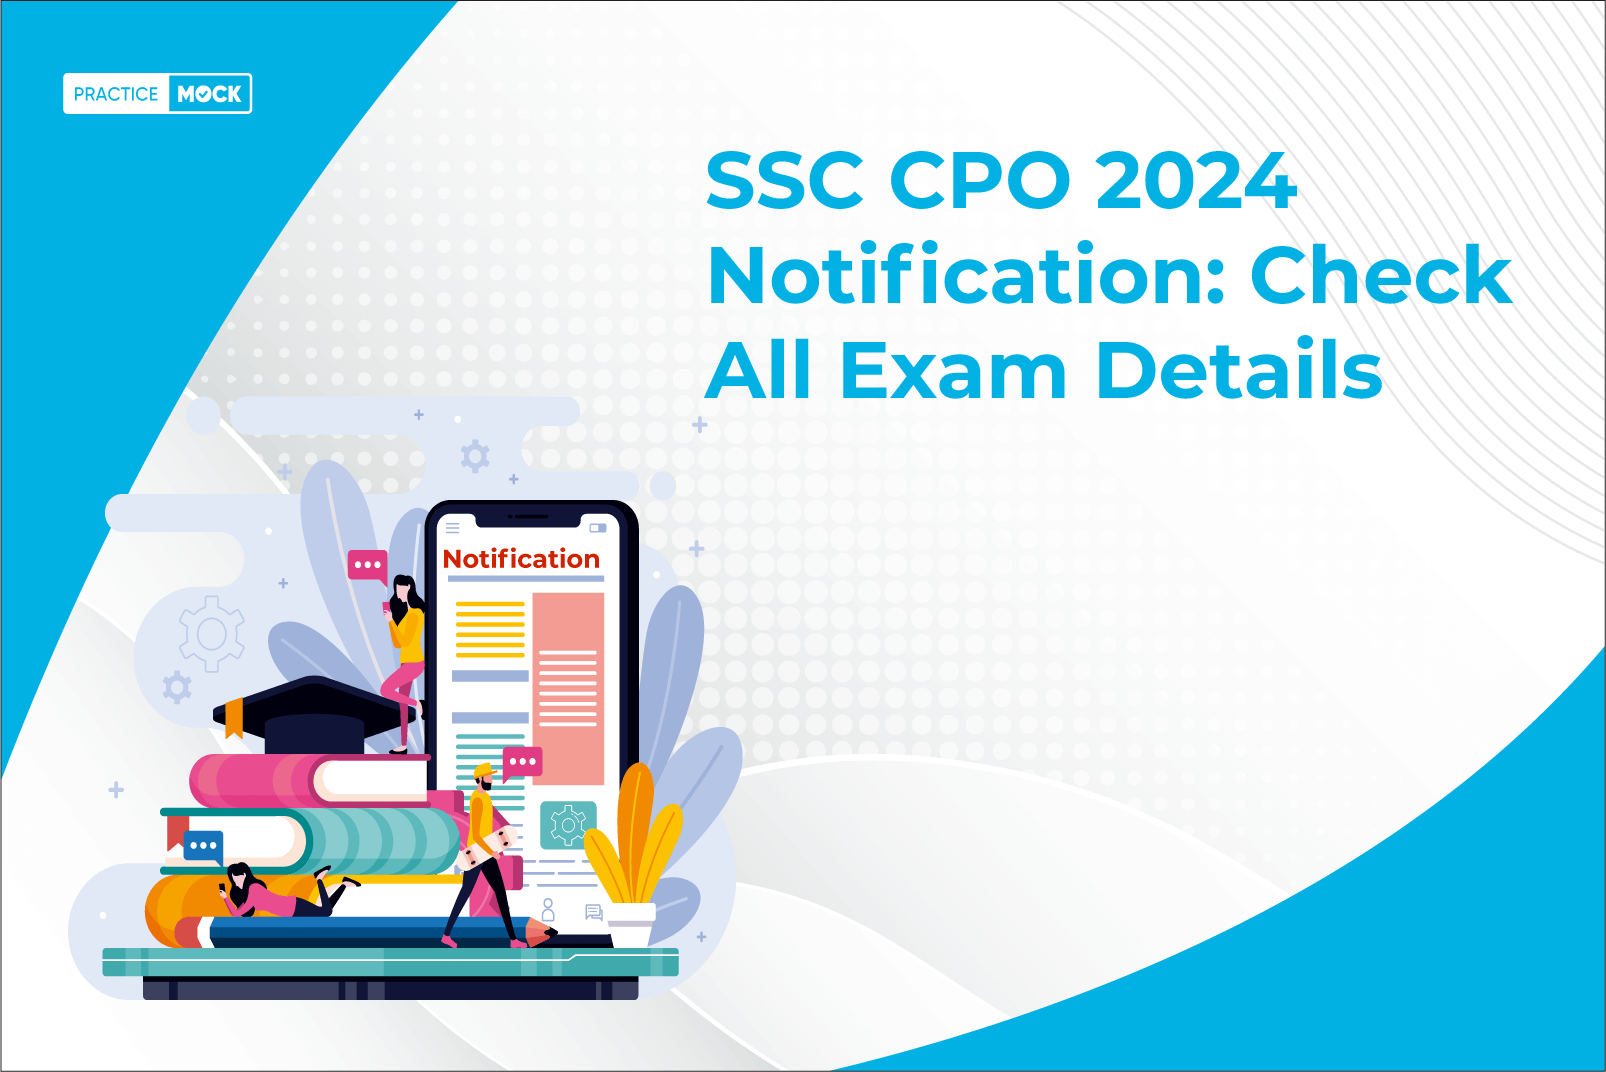 SSC CPO 2024 Notification Check All Exam Details